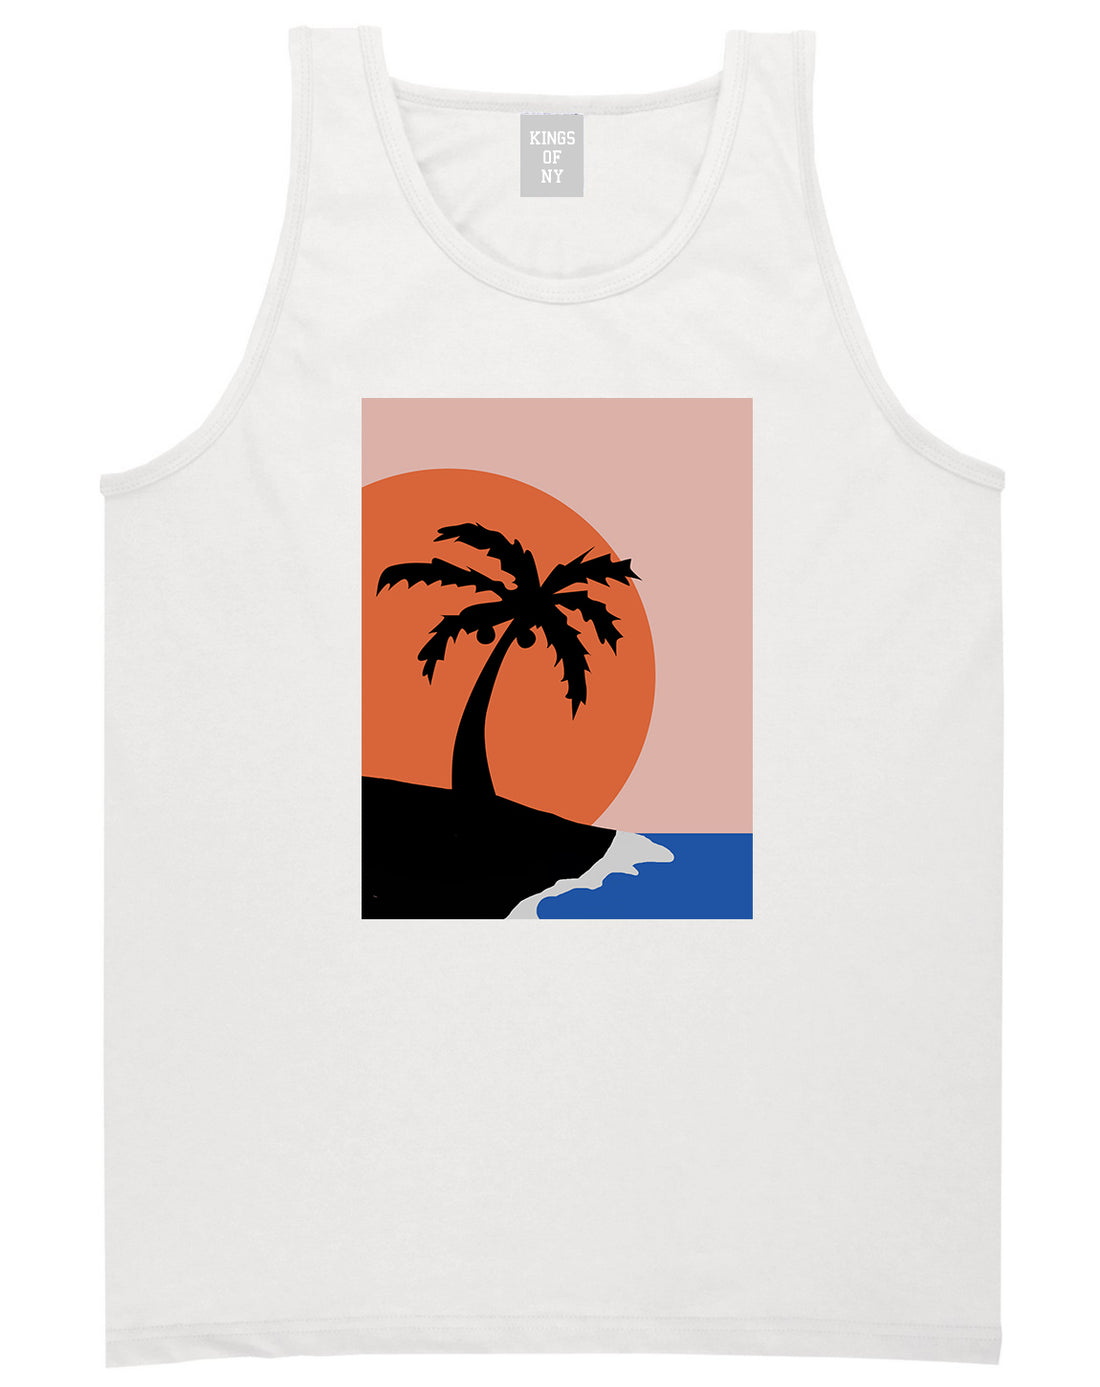 Sunset Palm Tree Vacation Mens Tank Top Shirt White by Kings Of NY